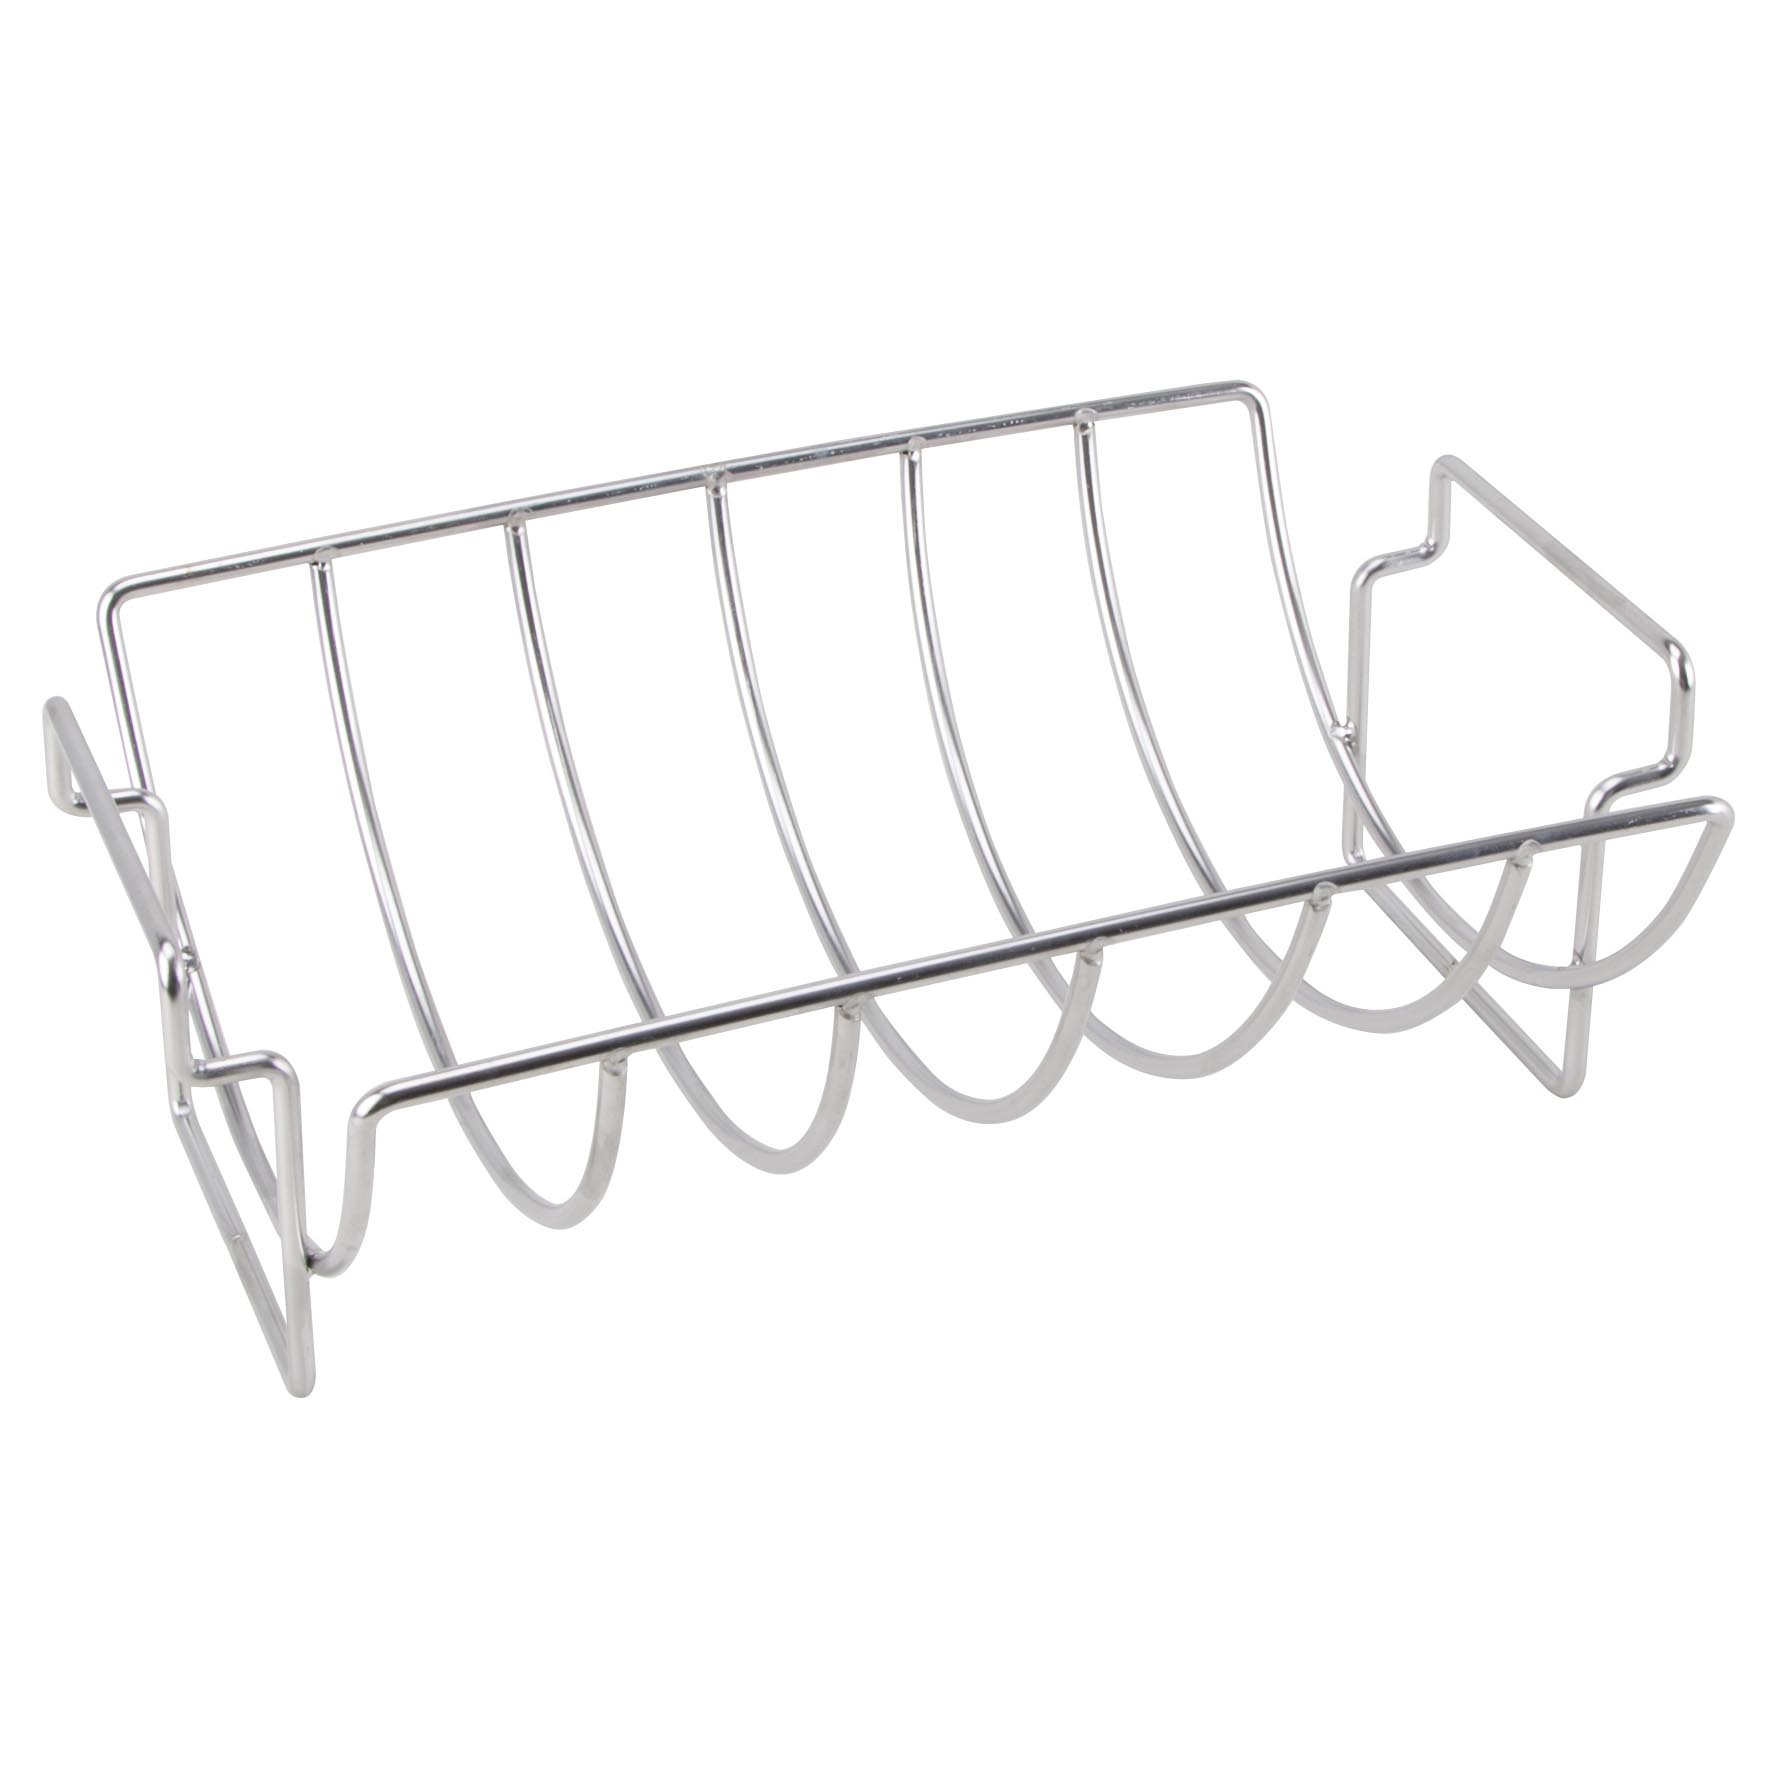 Rib and Roast Holder, 14-1/2 in L, Stainless Steel, Stainless Steel, Build-in Handle